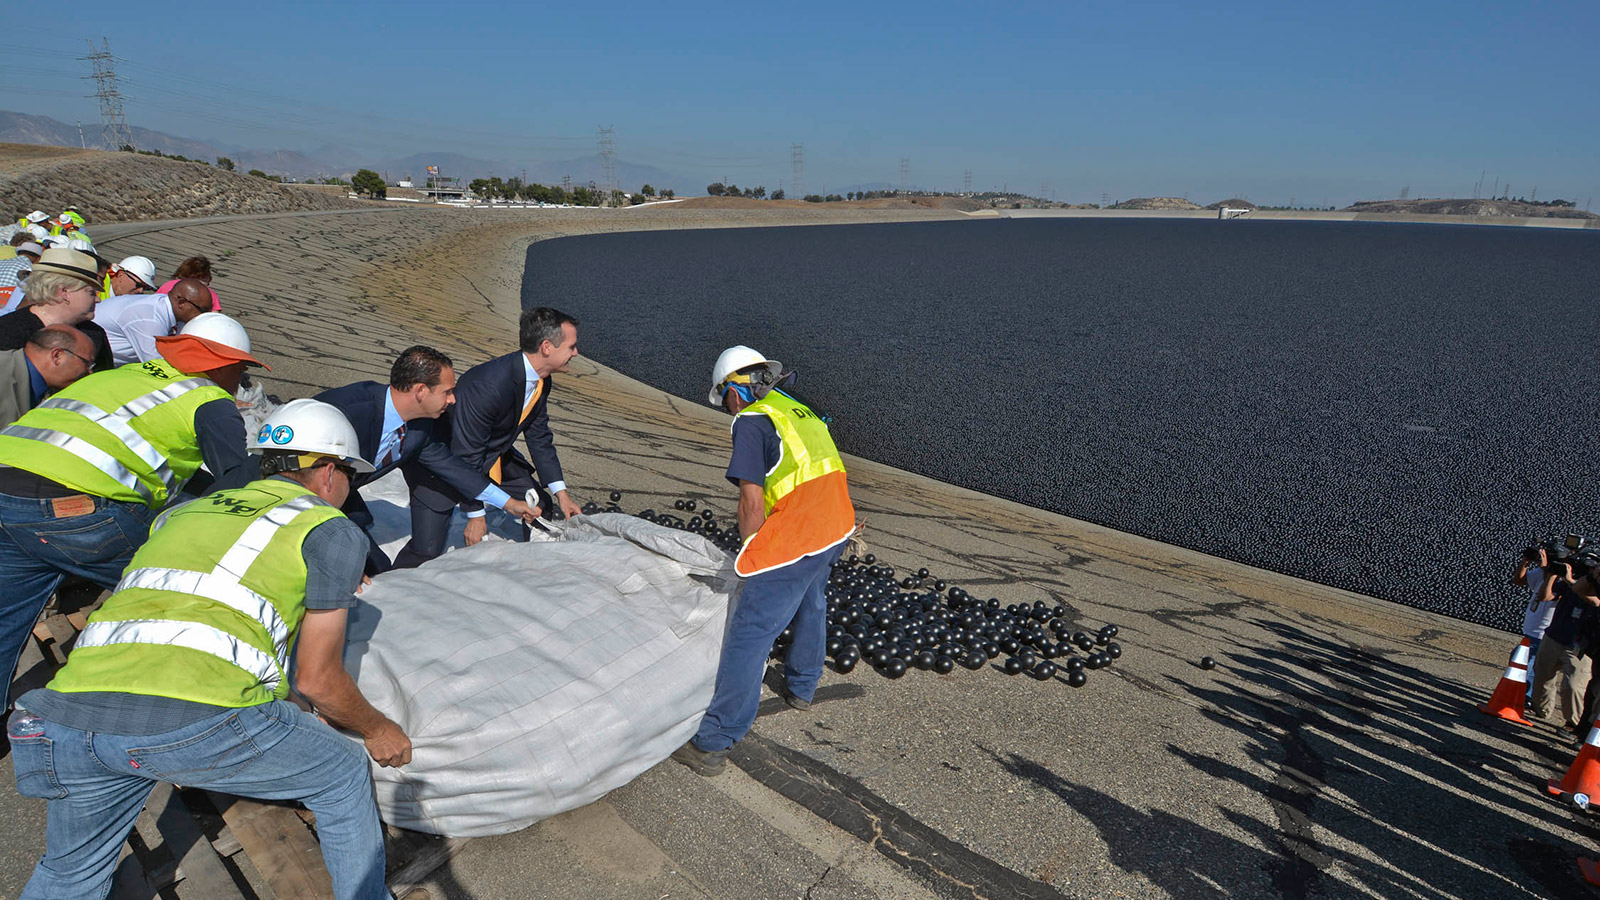 Council member Mitch Englander and LA Mayor Eric Garcetti along with LADWP workers releasing shade balls into the LA Reservoir